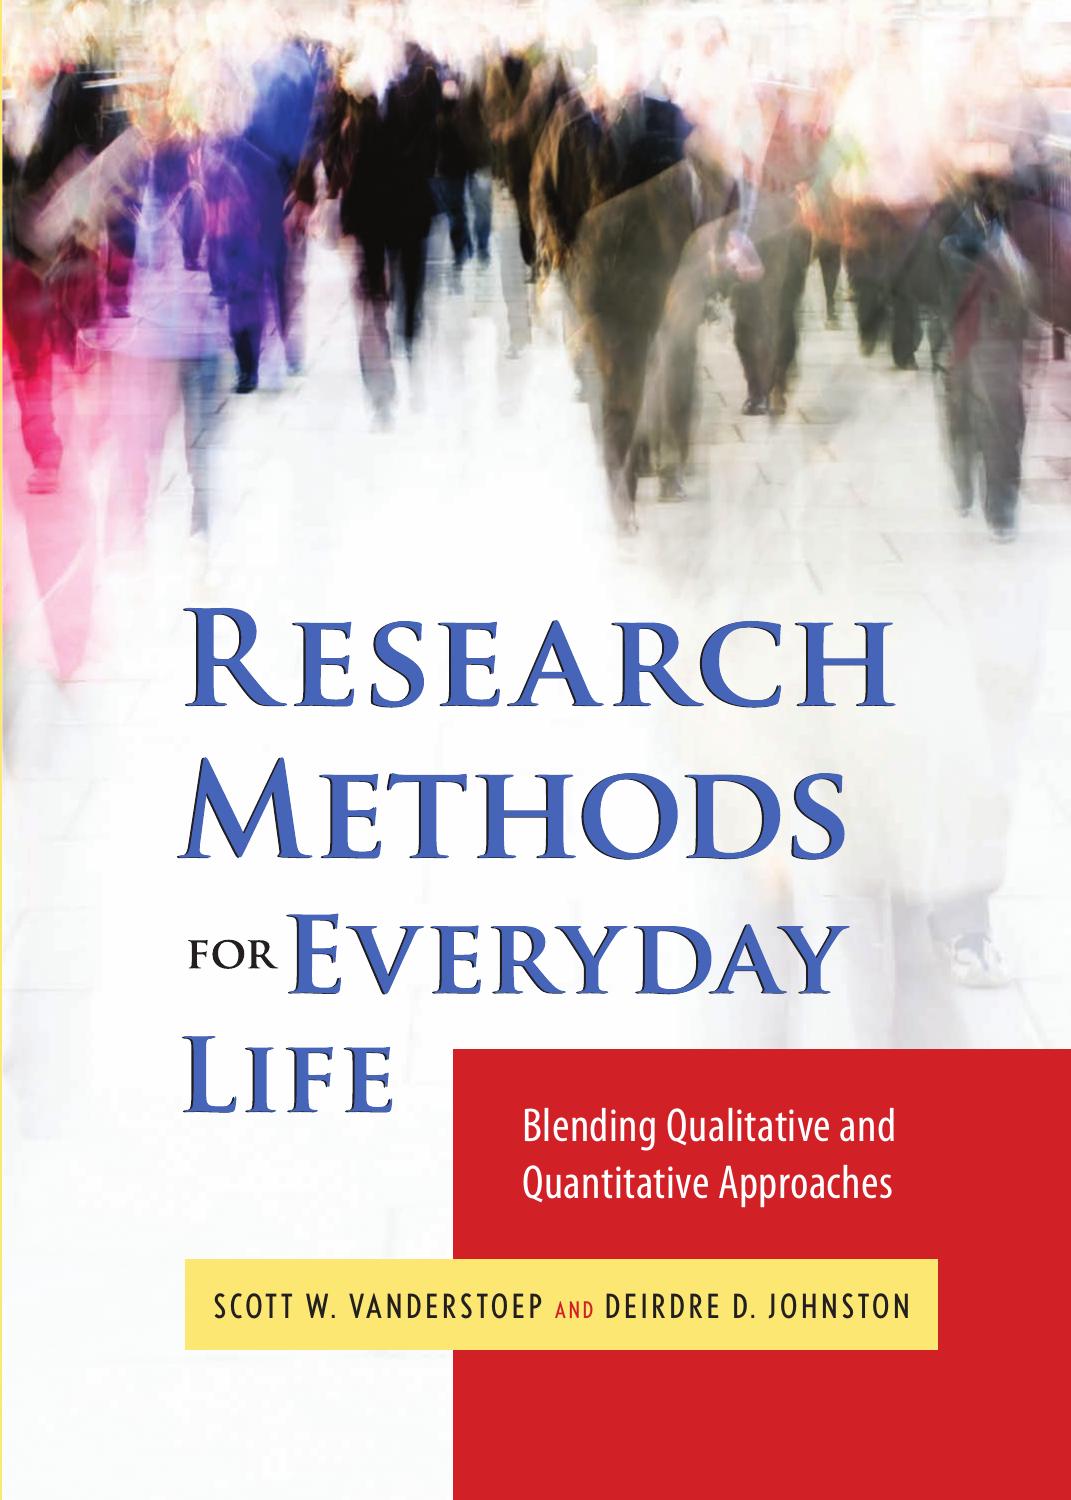 Research Methods for Everyday Life  Blending Qualitative and Quantitative Approaches 2009